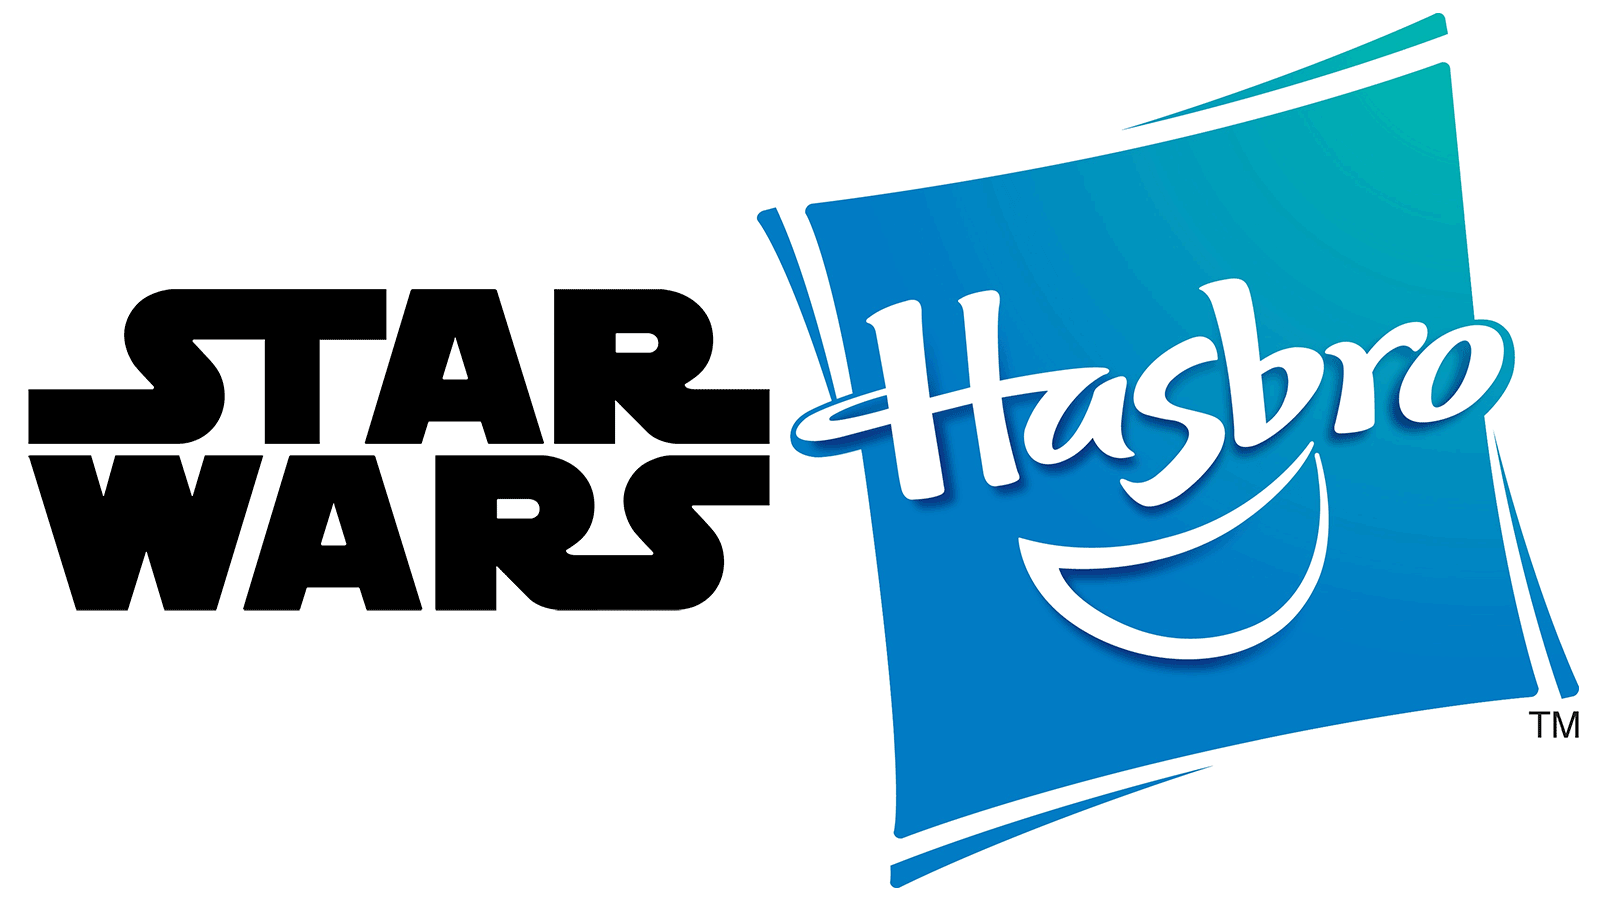 Q&A Session With The Hasbro Star Wars Team